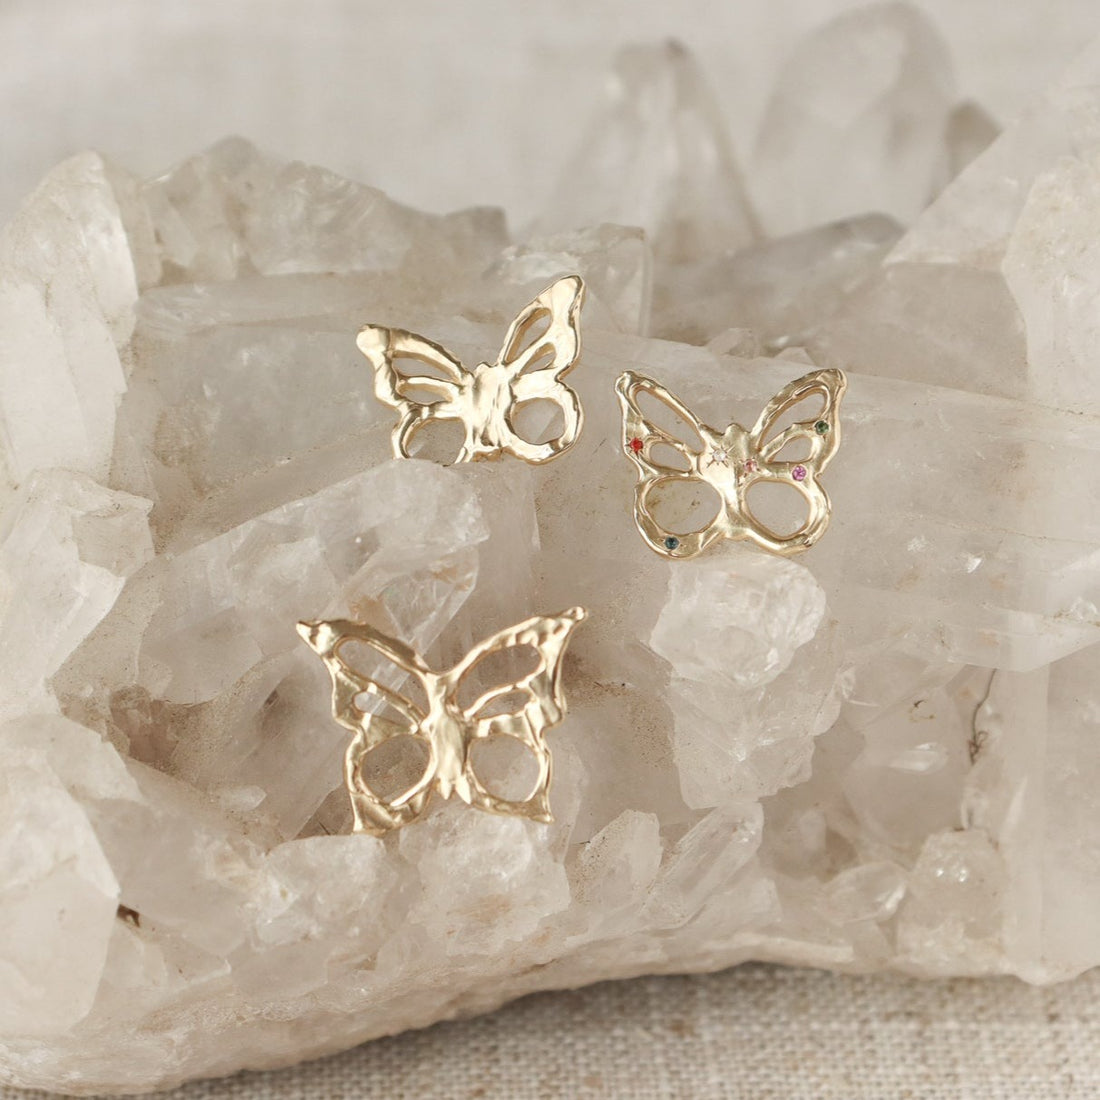 An array of unique 14k gold  butterfly charms, all arranged atop  a crystal.